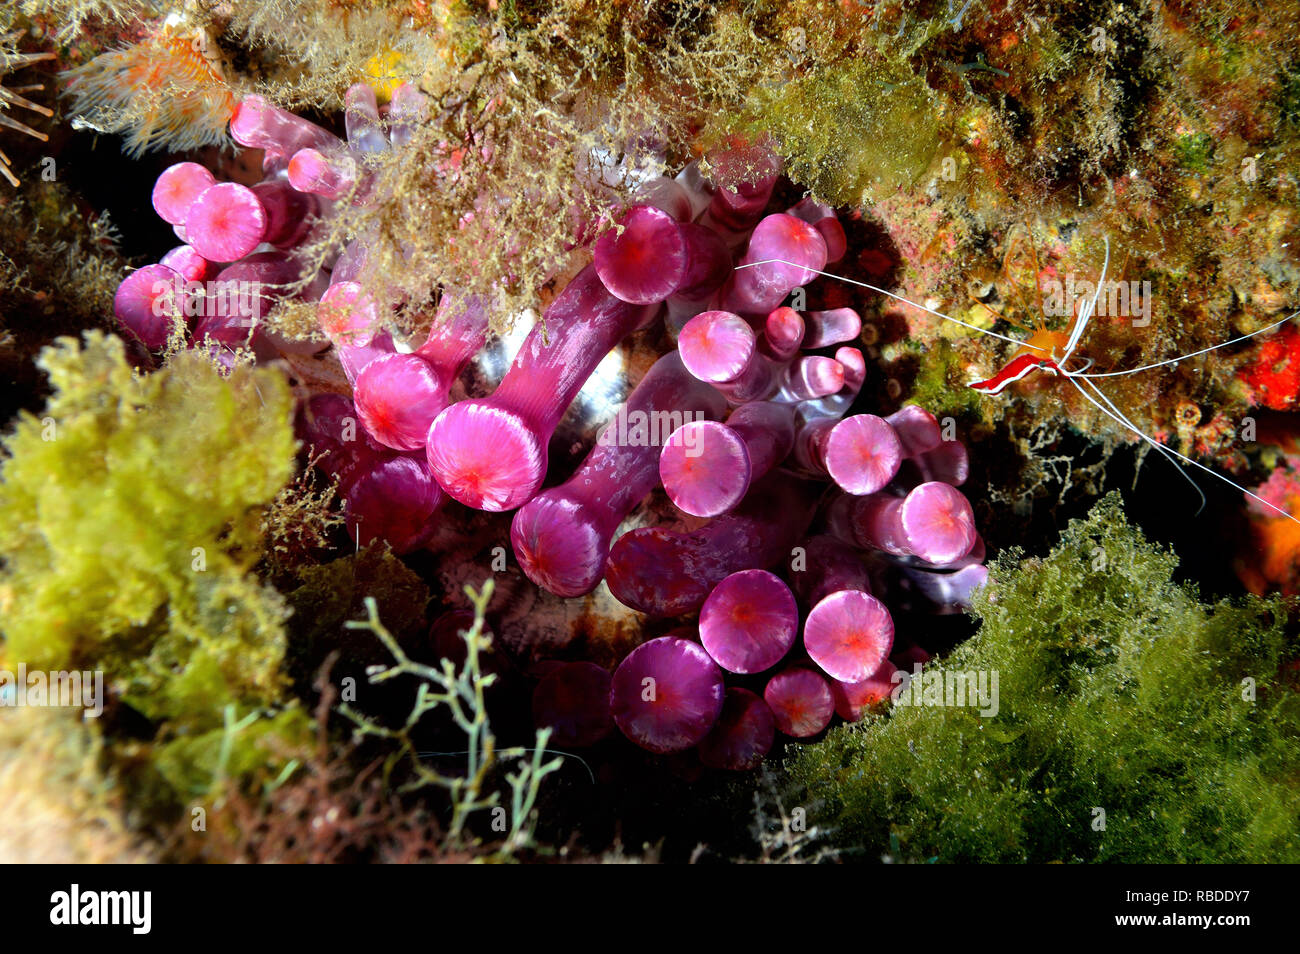 Club-Tipped Anemone & Cleaner Shrimp in Tenerife - Canary Islands Stock Photo